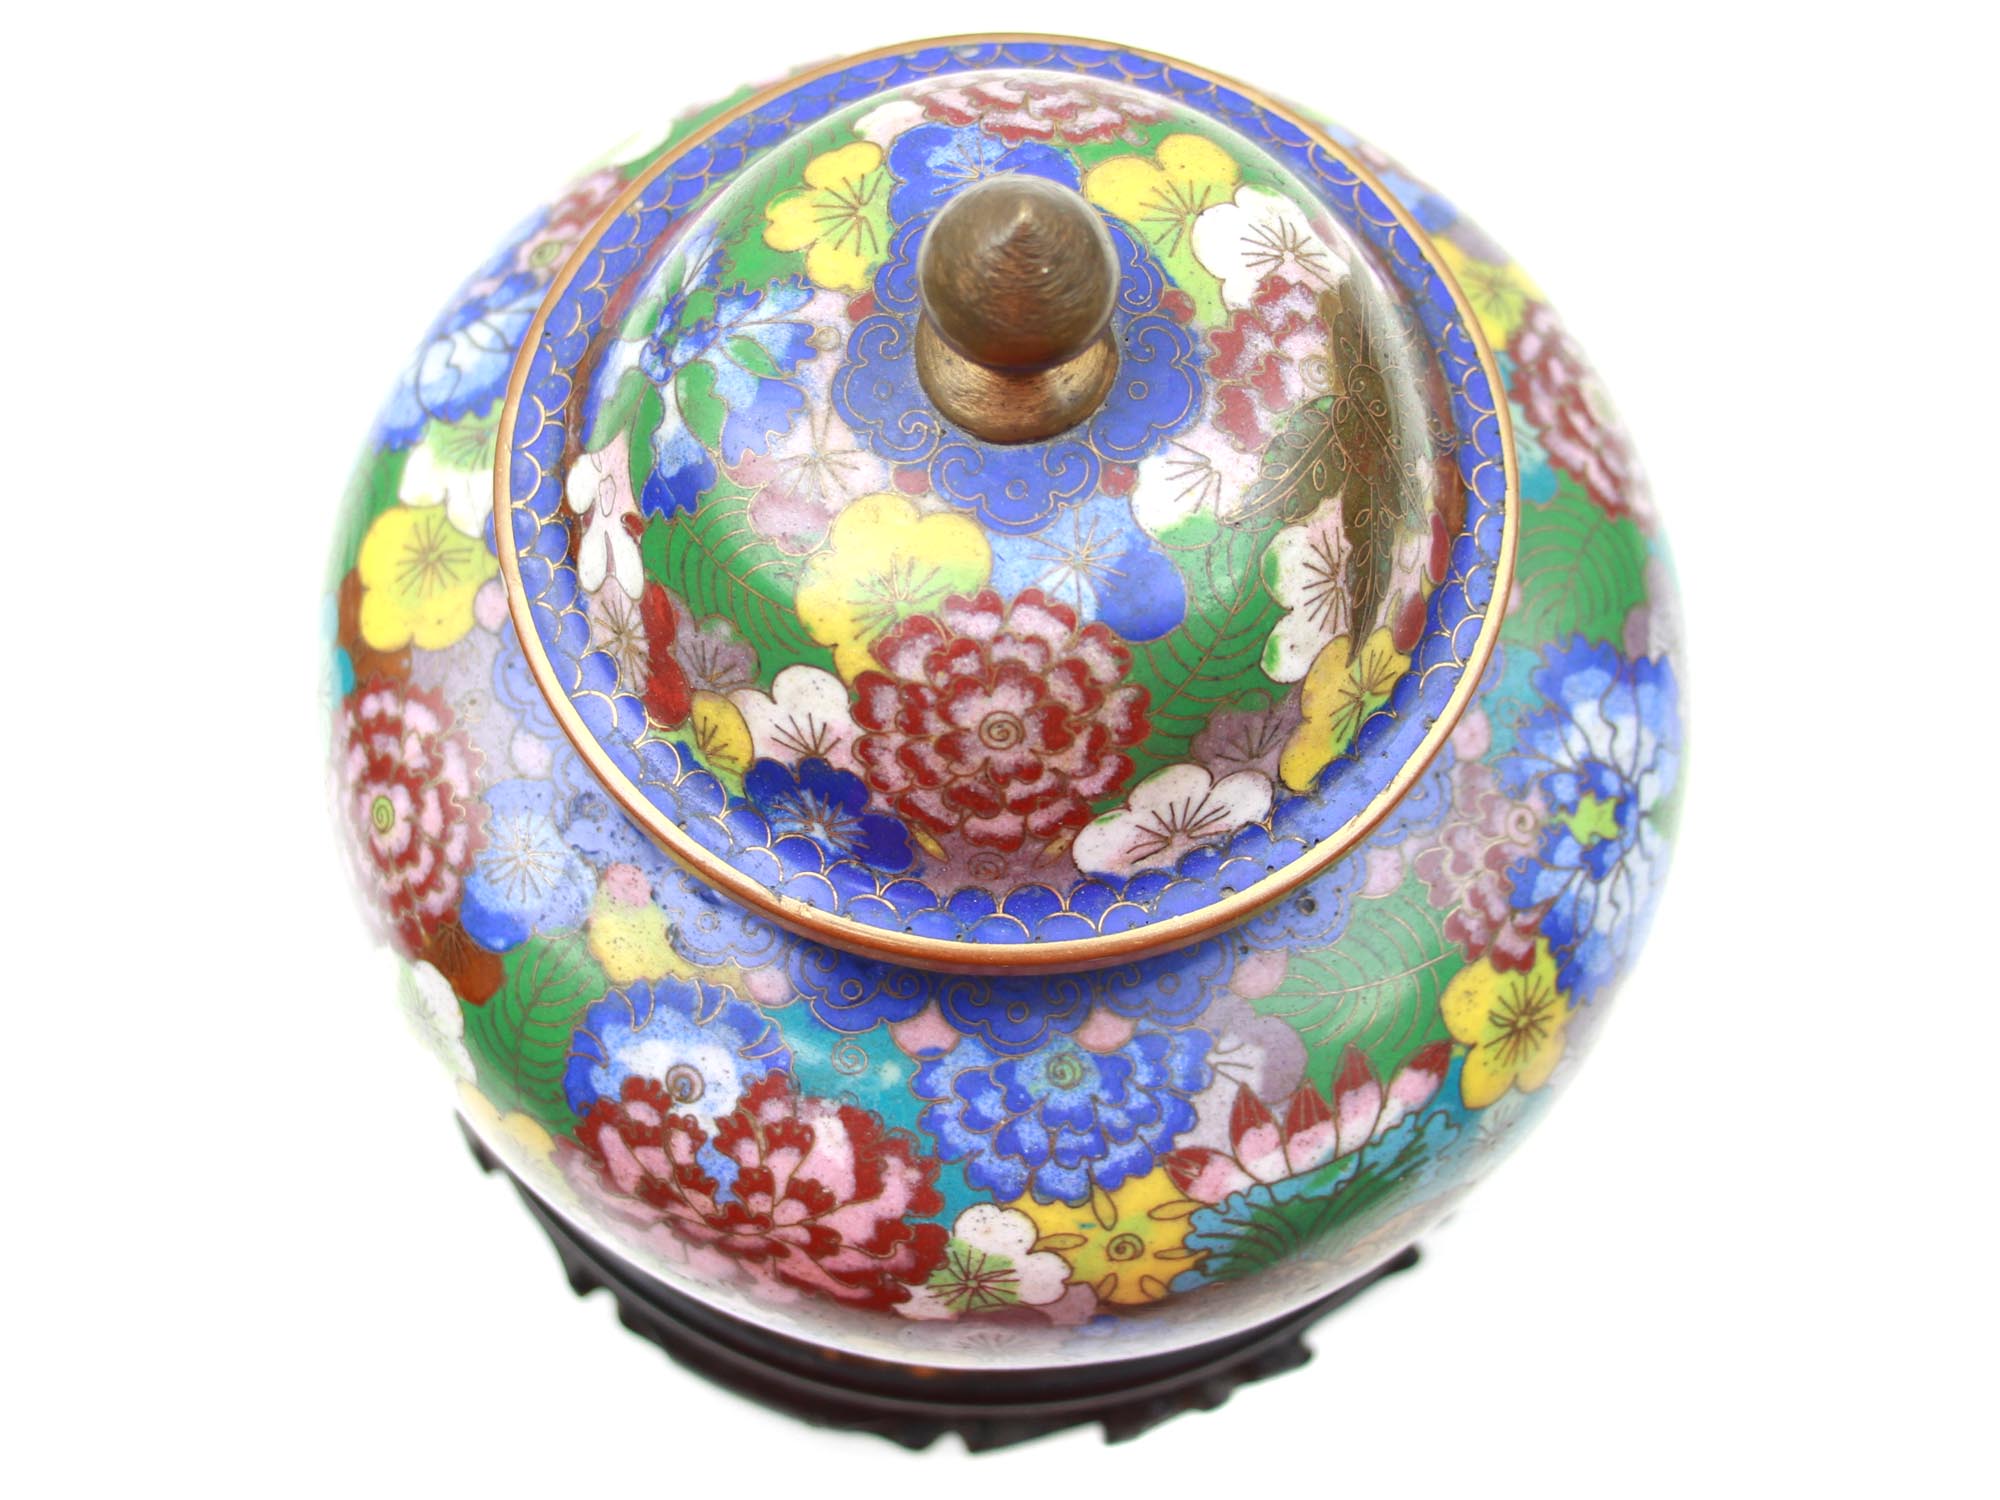 A CLASSIC CHINESE CLOISONNE ENAMEL LIDDID VASE PIC-1